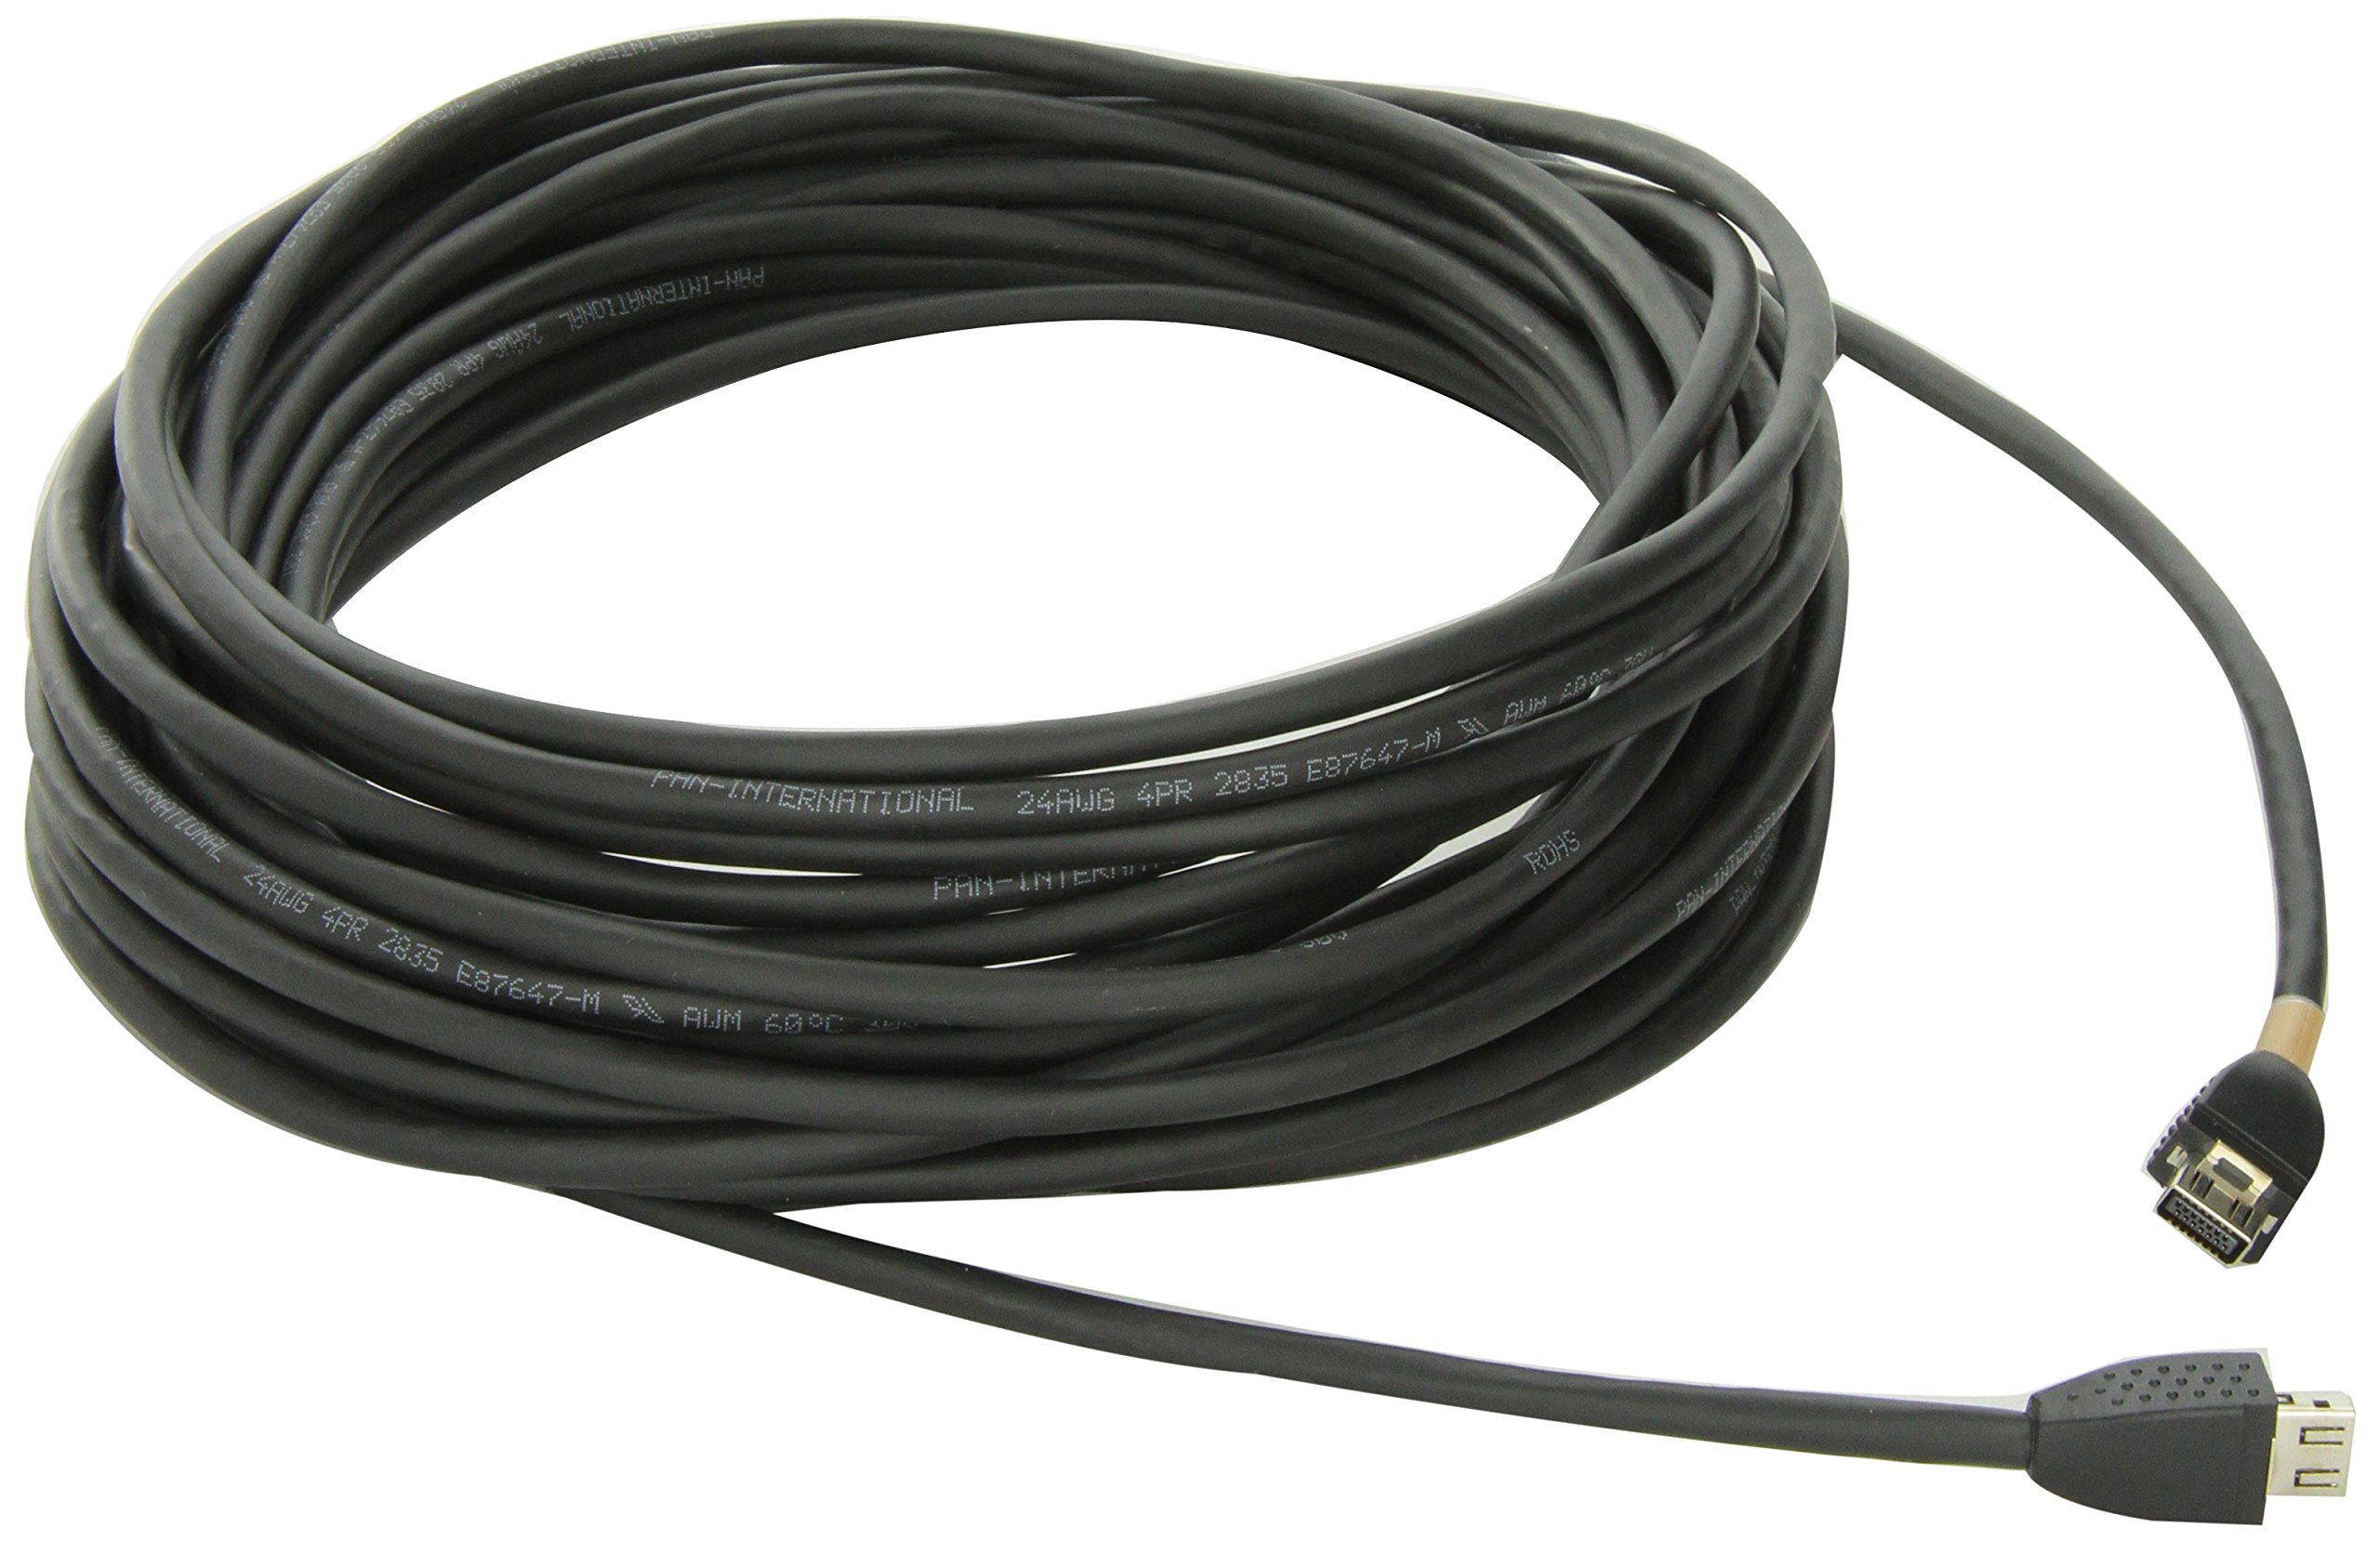 CABLE HDX MIC ARRAY CABLE WALTA